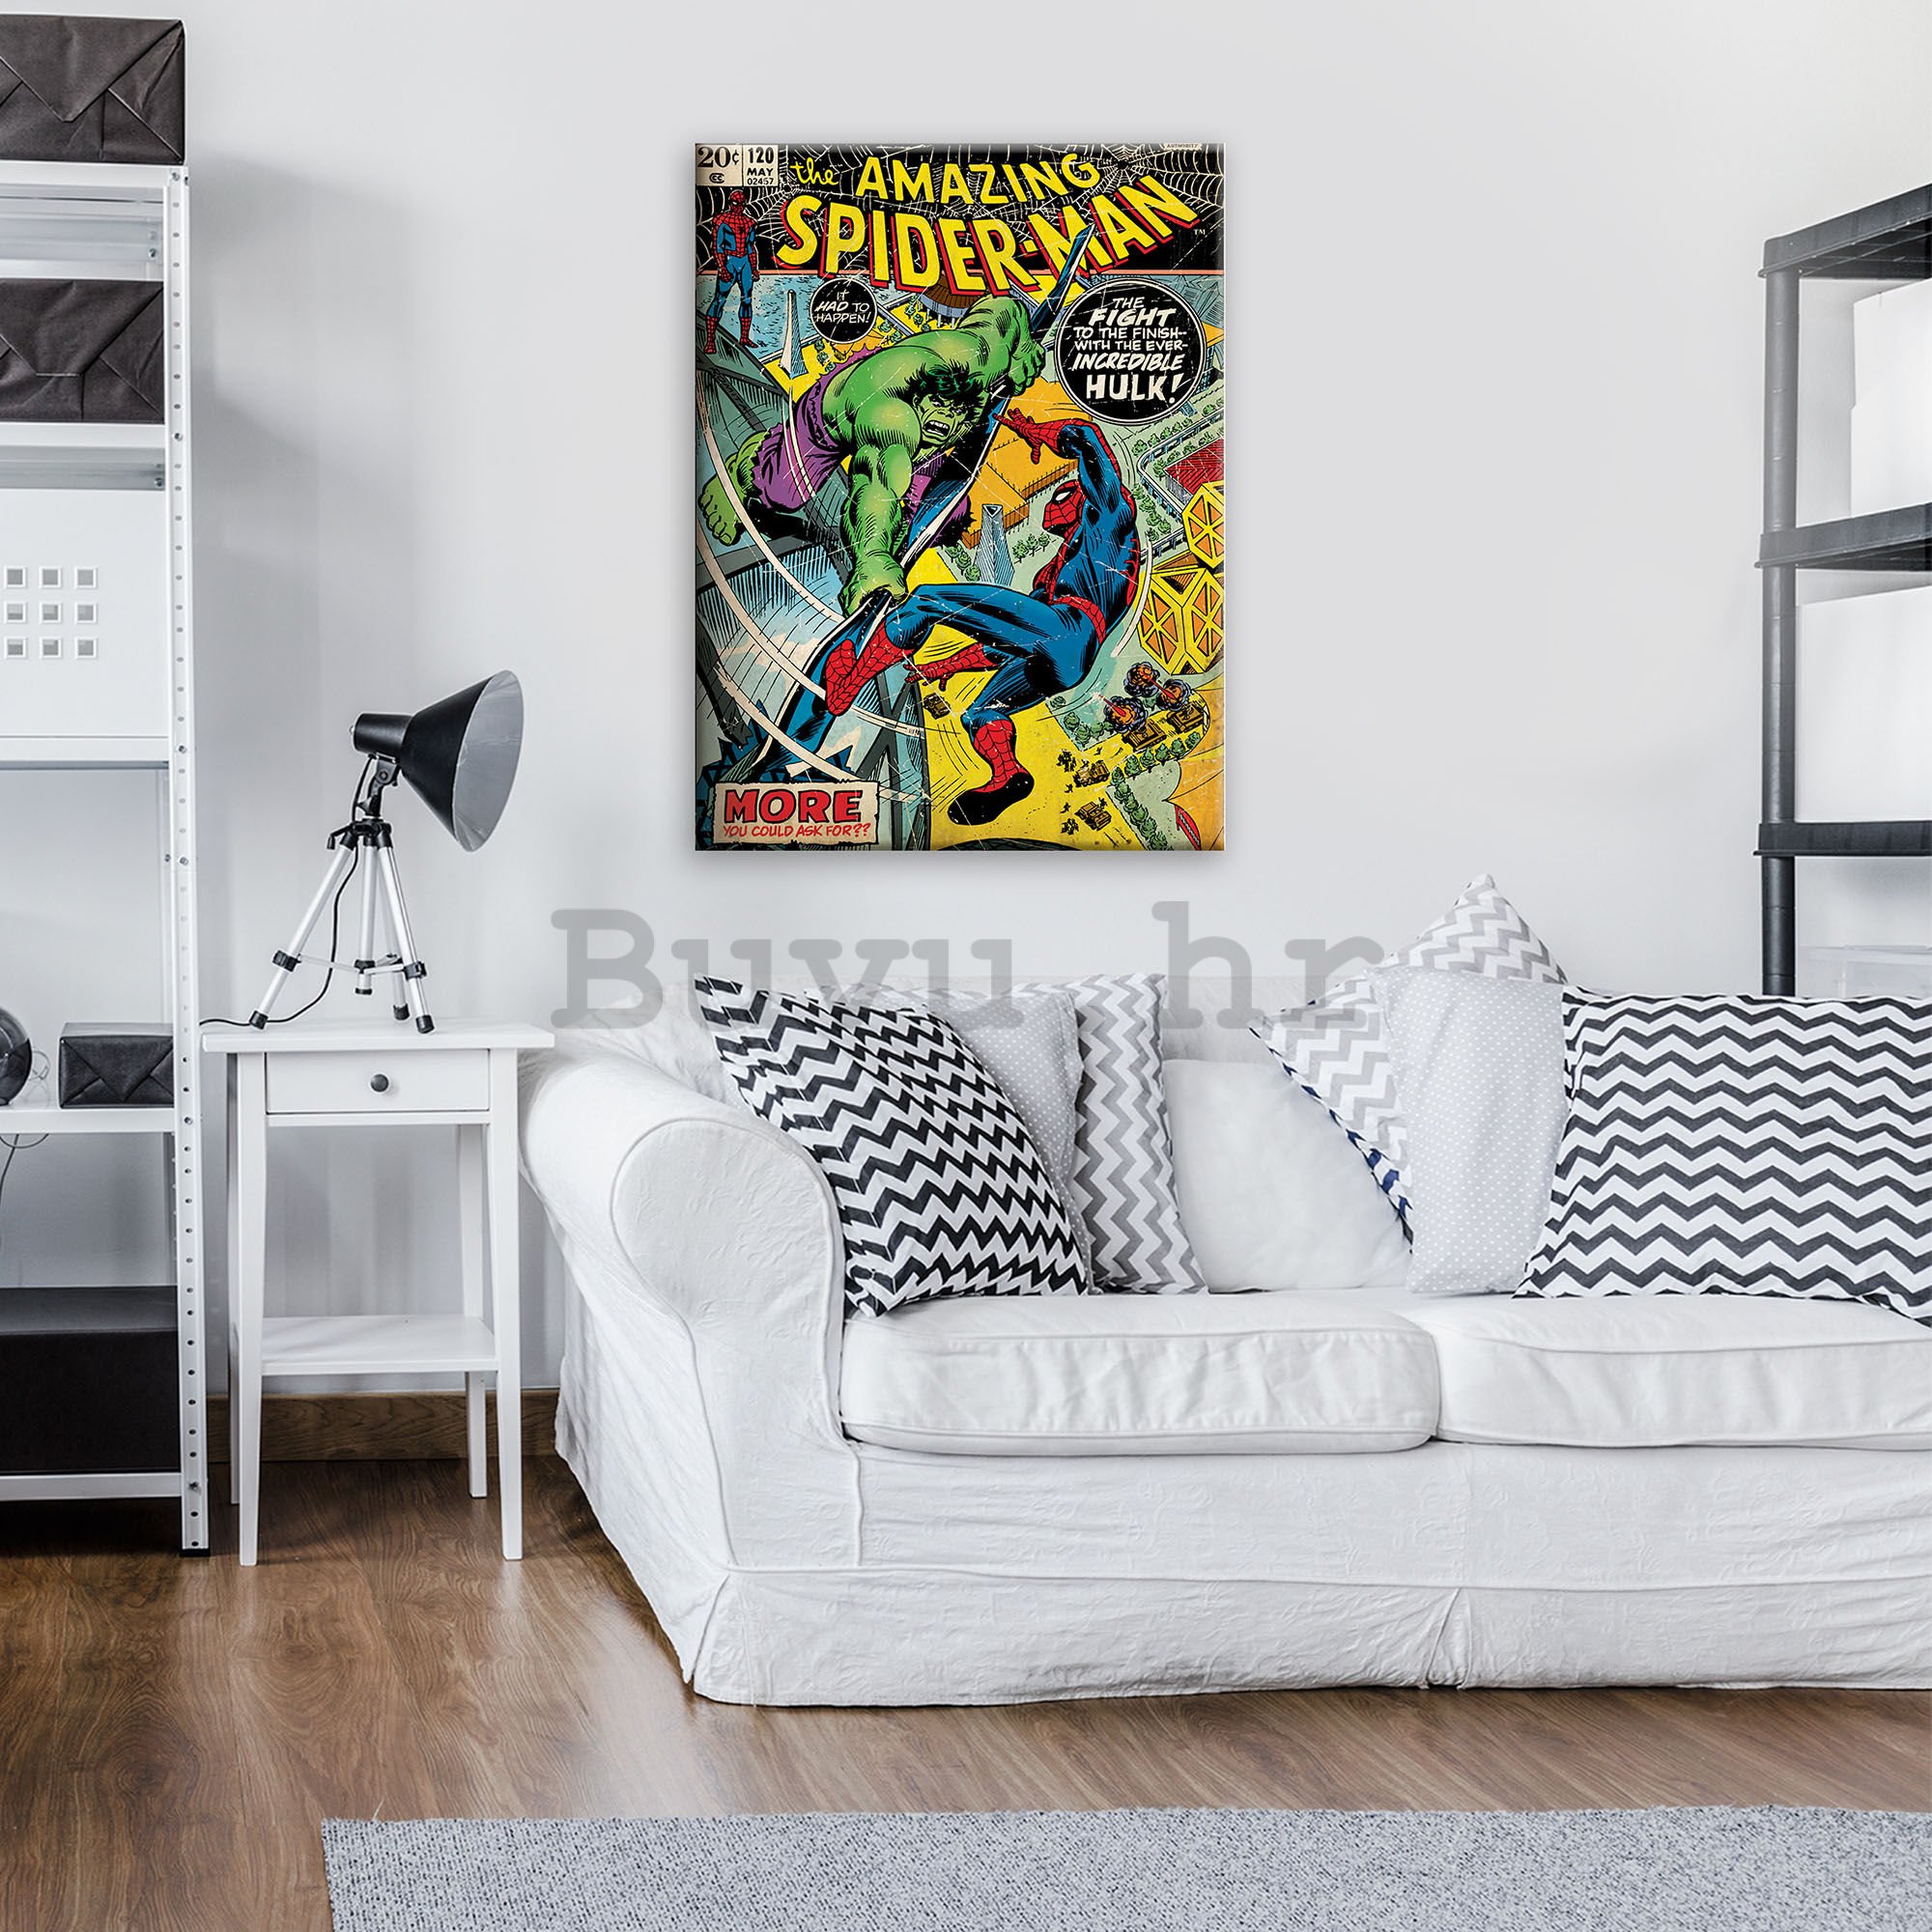 Slika na platnu: The Amazing Spiderman (More You Could Ask For?) - 60x80 cm